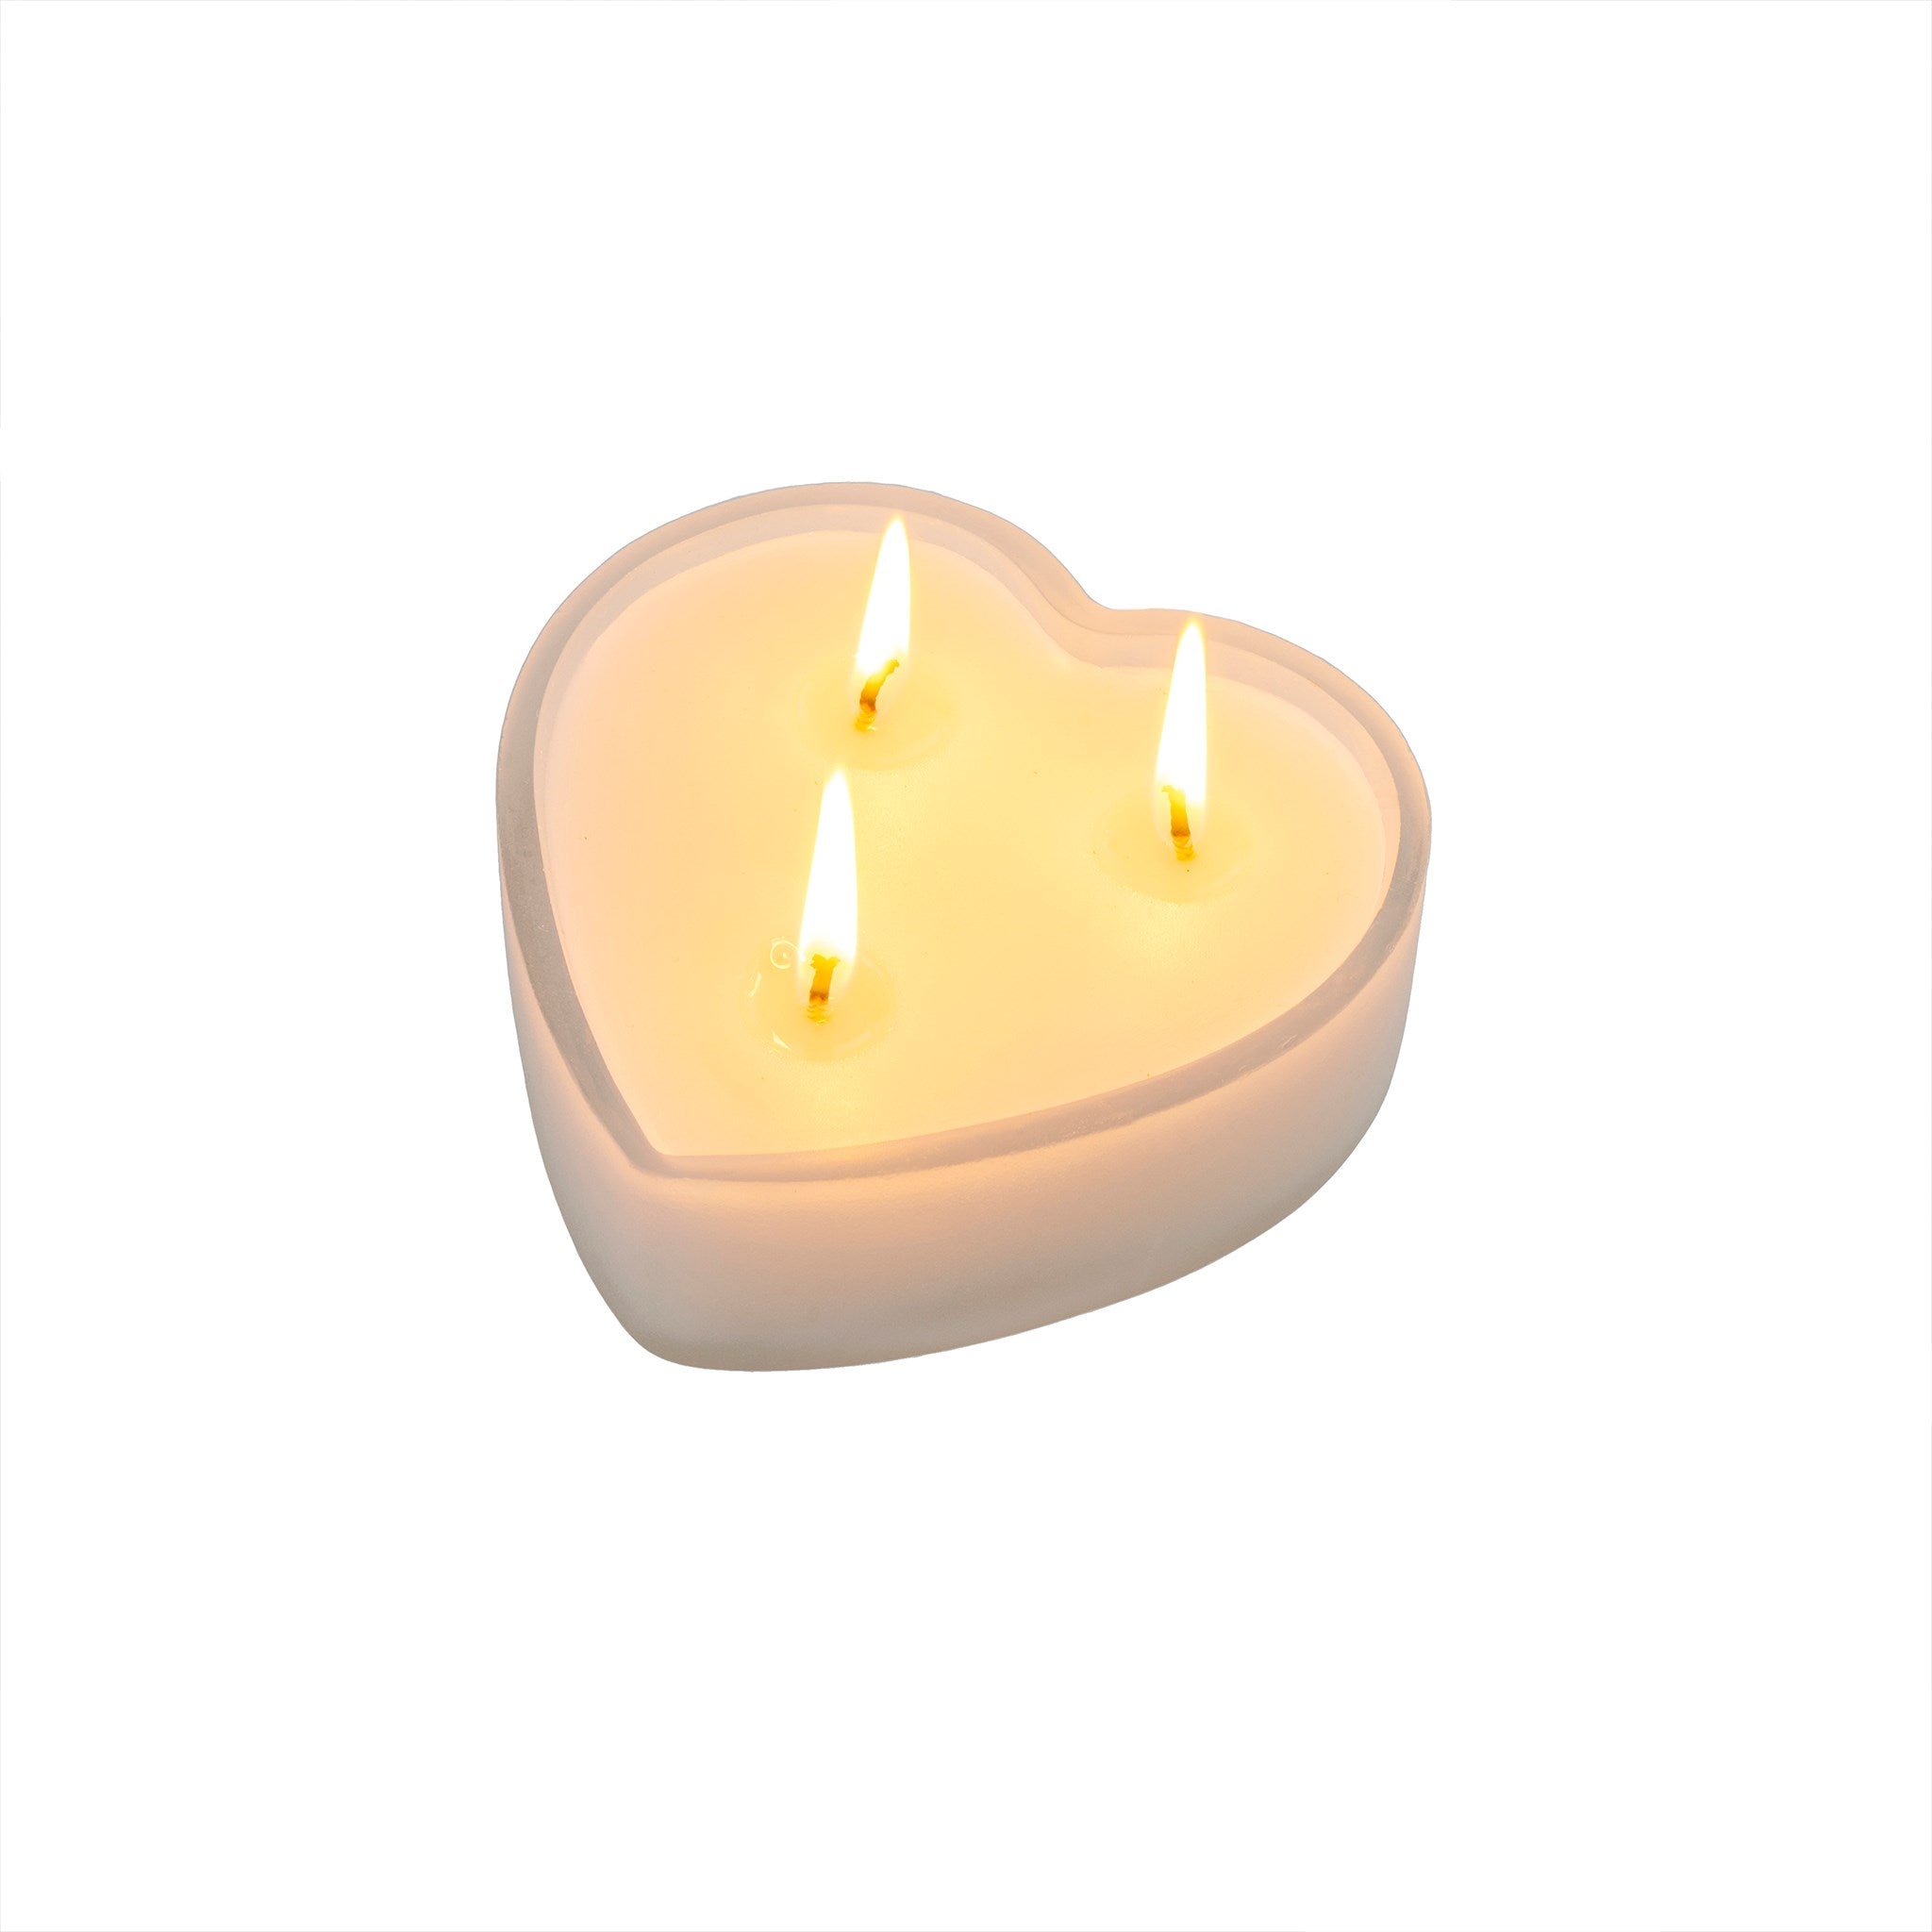 Orange Blossom Heart Candles- 2 Colors